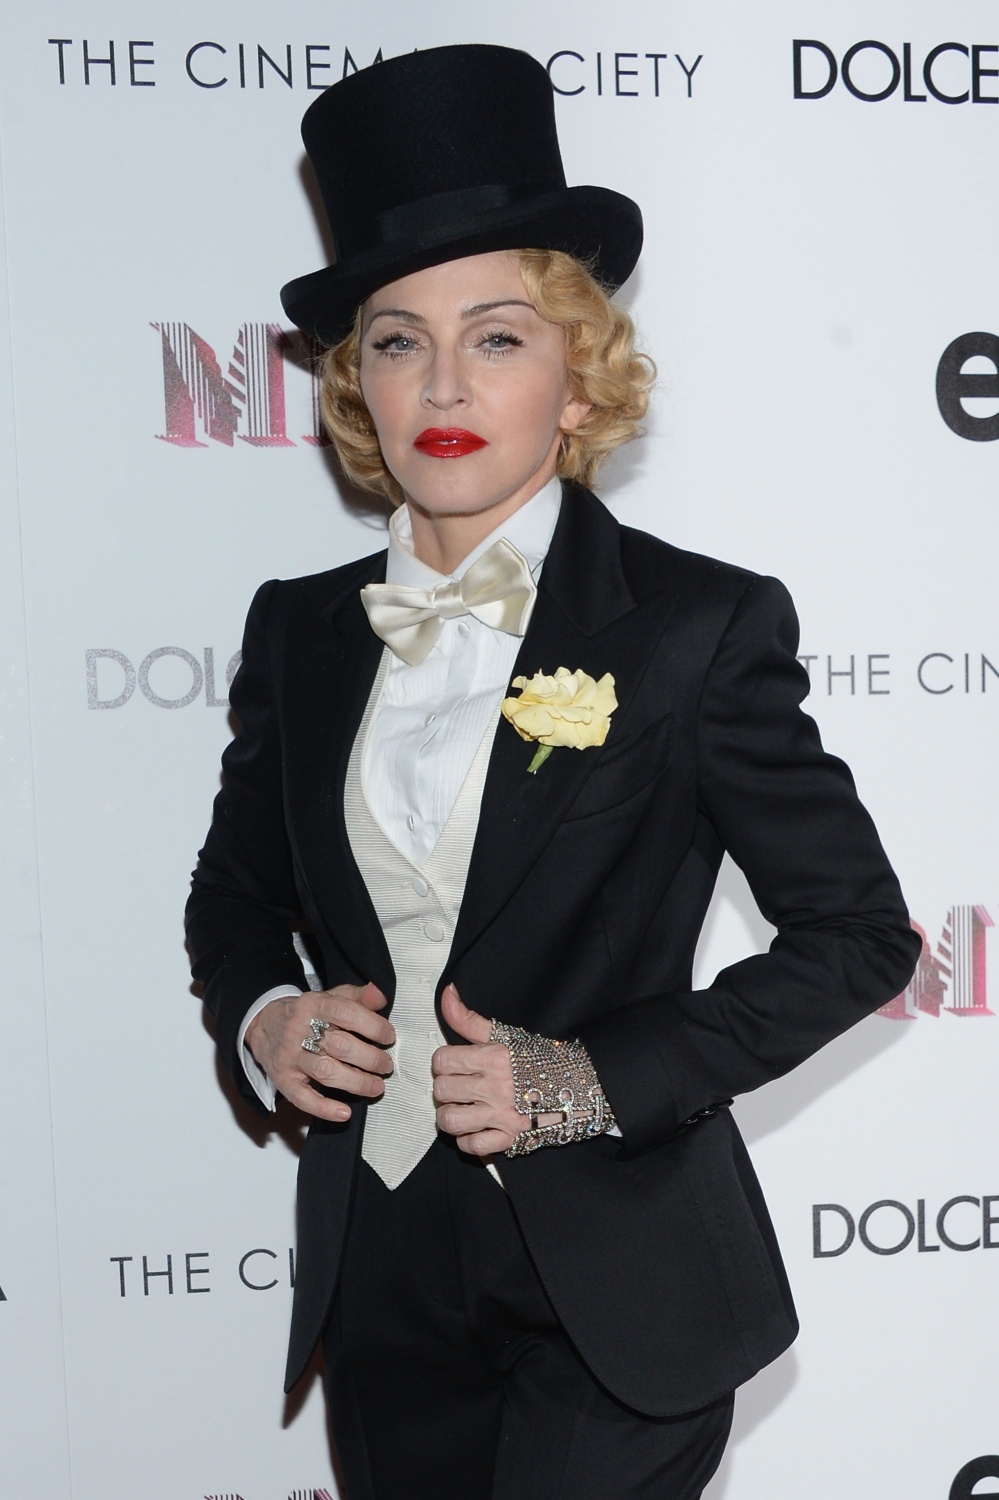 20130619-pictures-madonna-mdna-tour-premiere-screening-hq-24.jpg